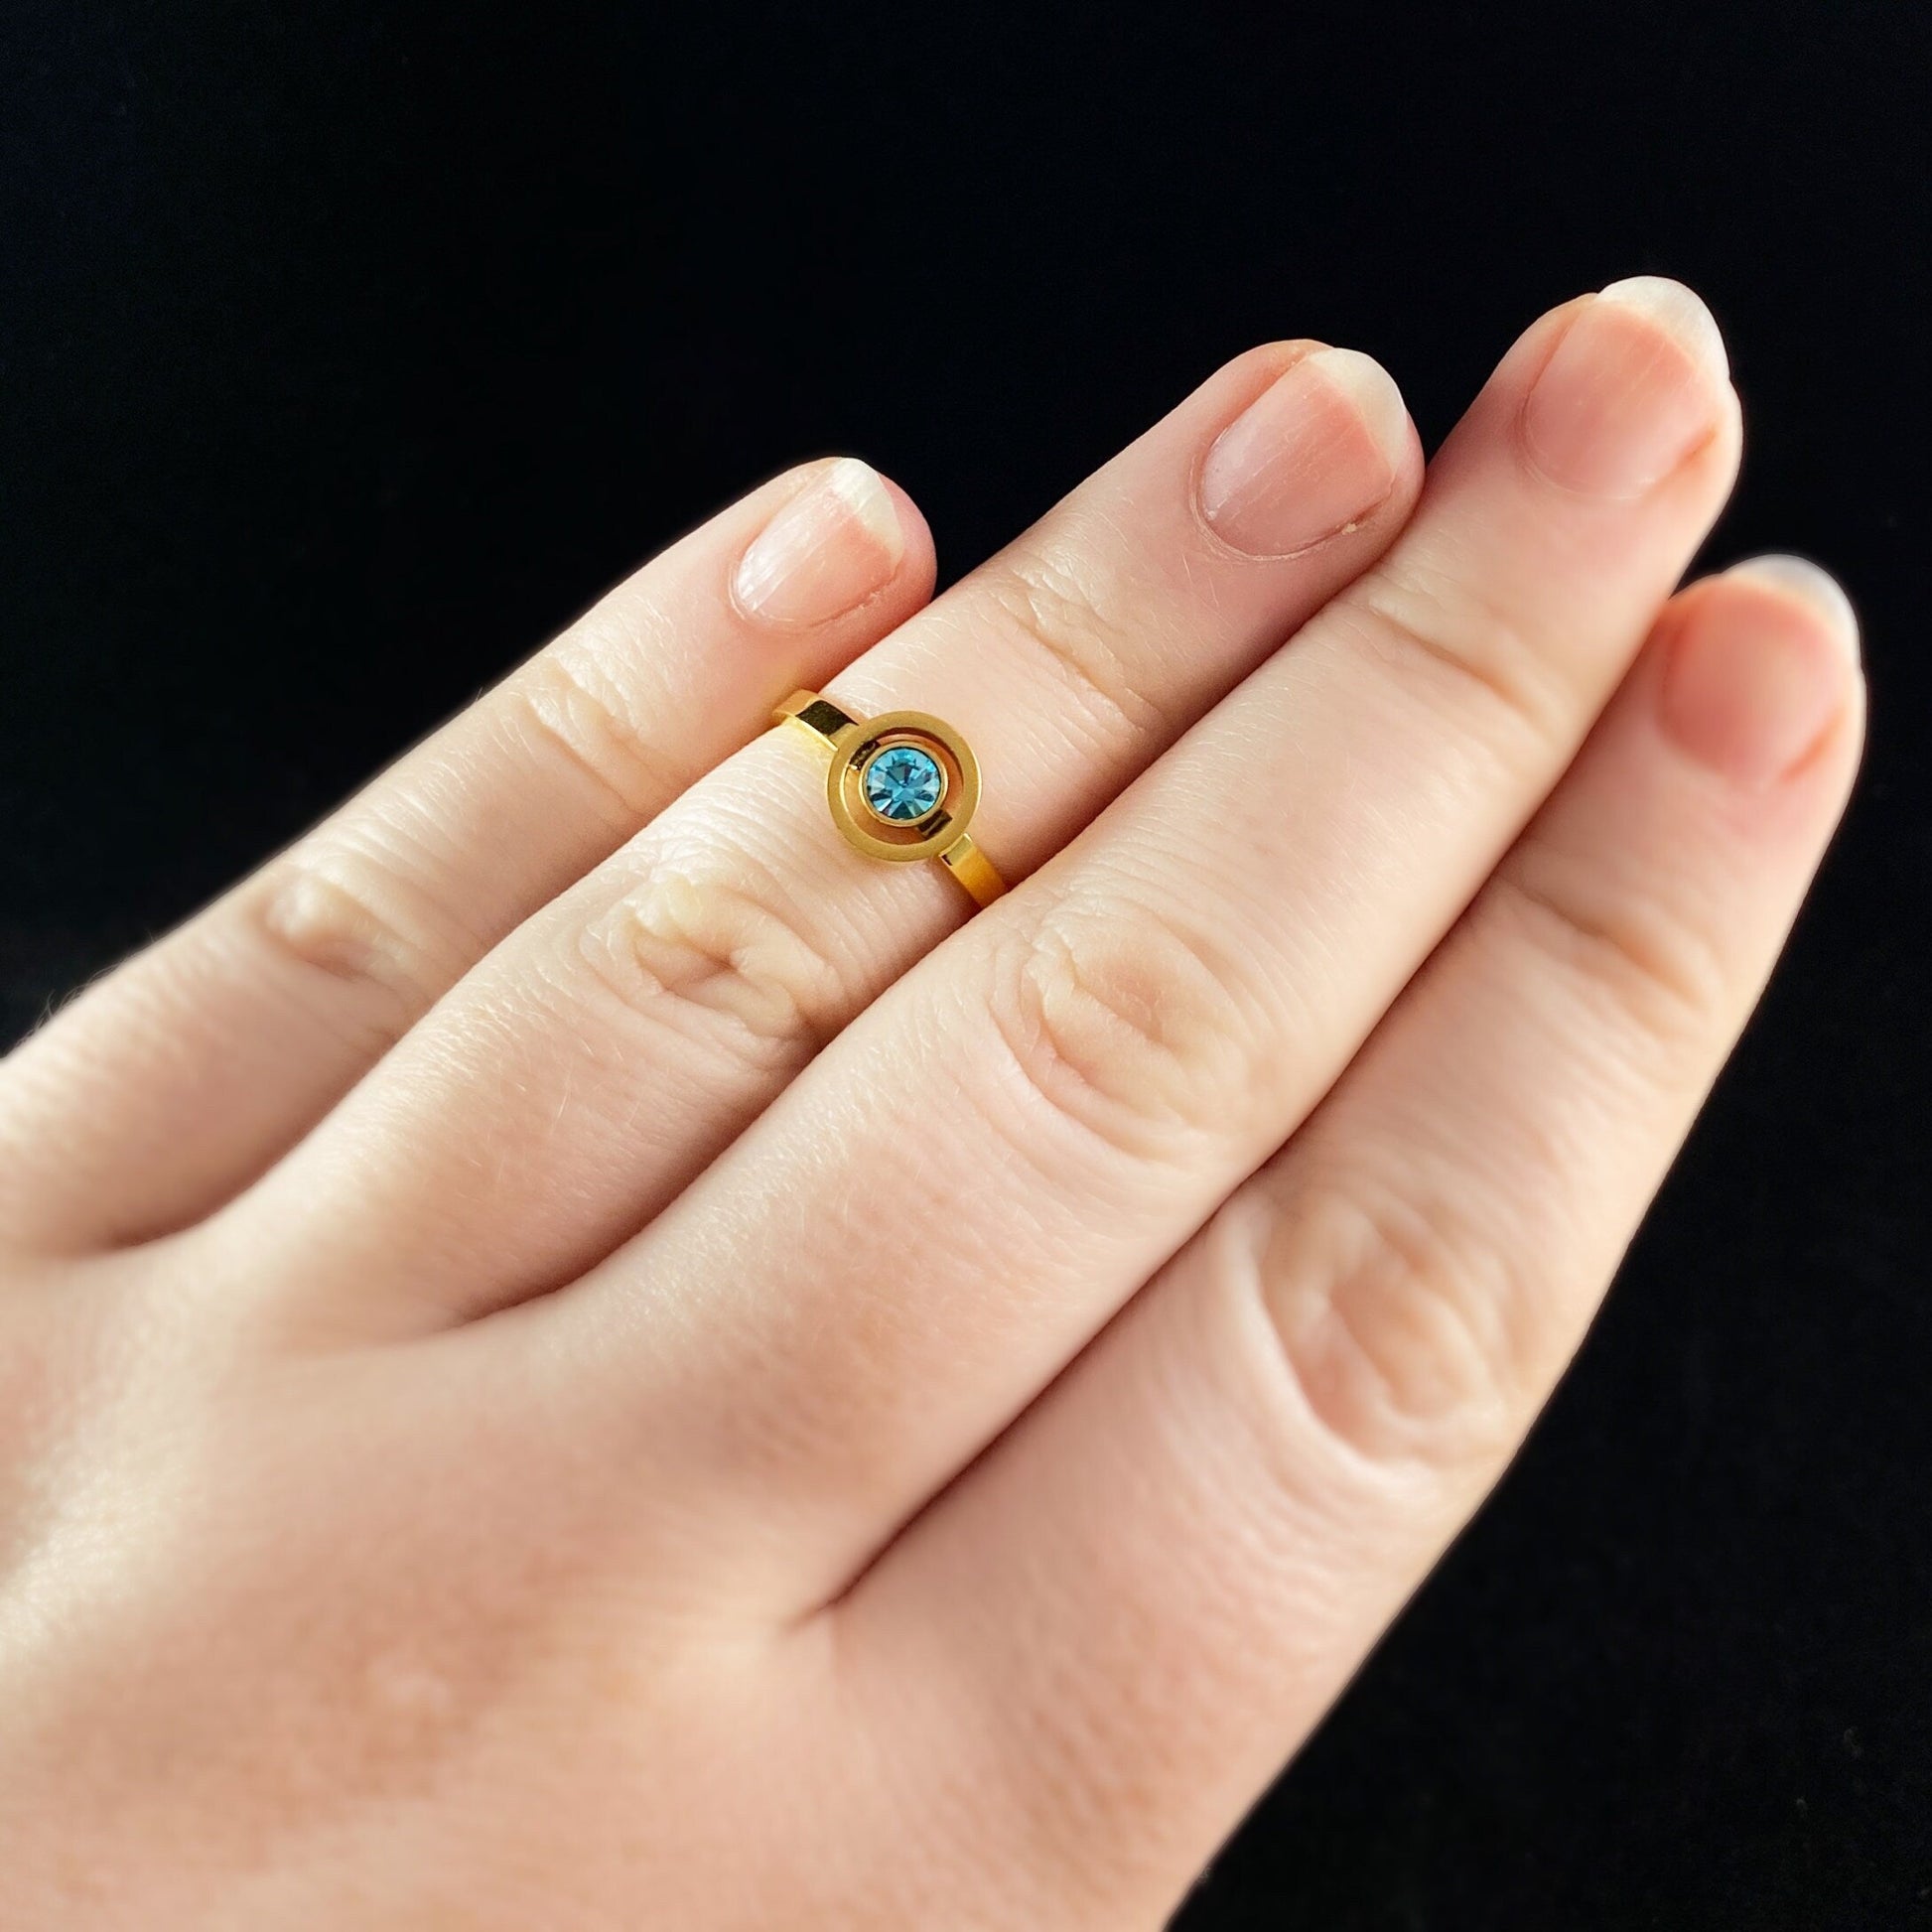 14K Gold Plated Adjustable Ring with Blue Crystal - Gold Jewelry for Women